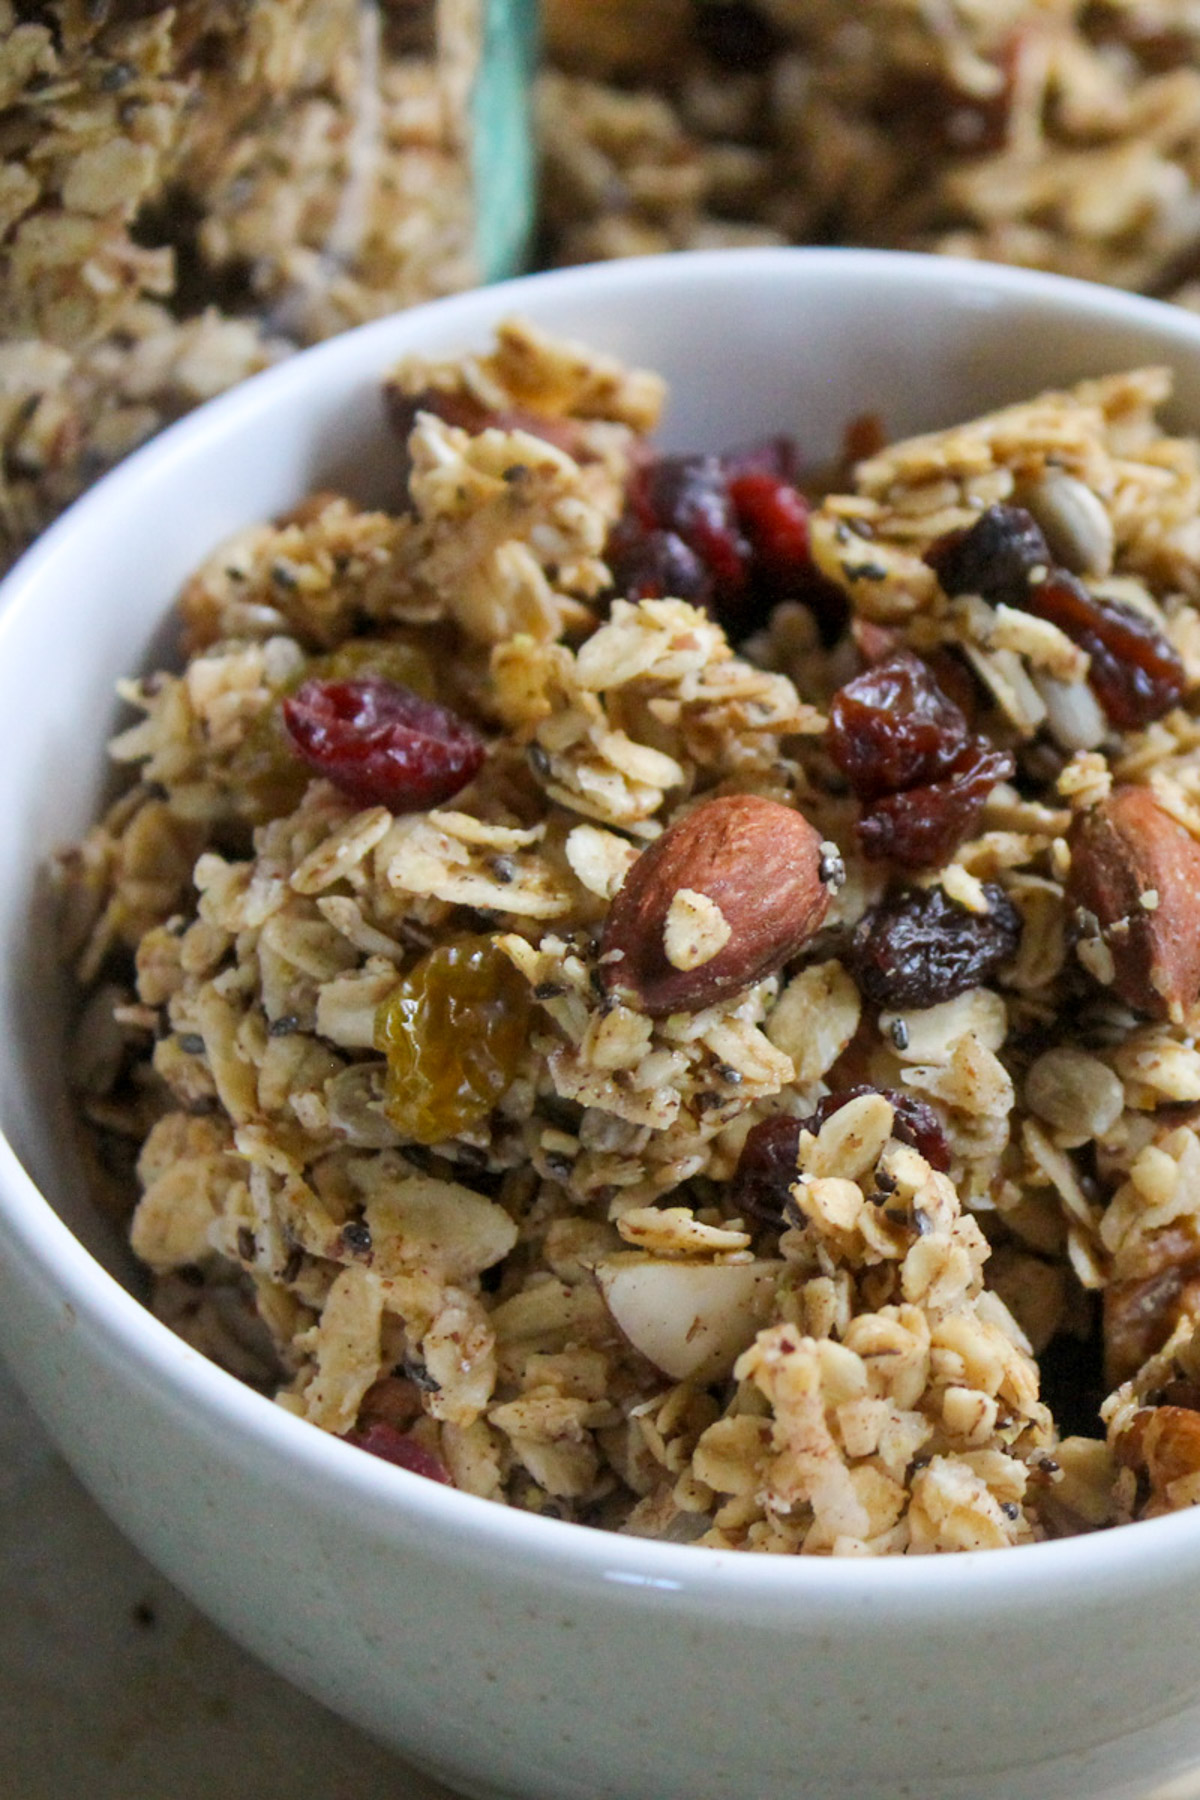 A bowl of almond spiced granola with big clusters and dried fruit.